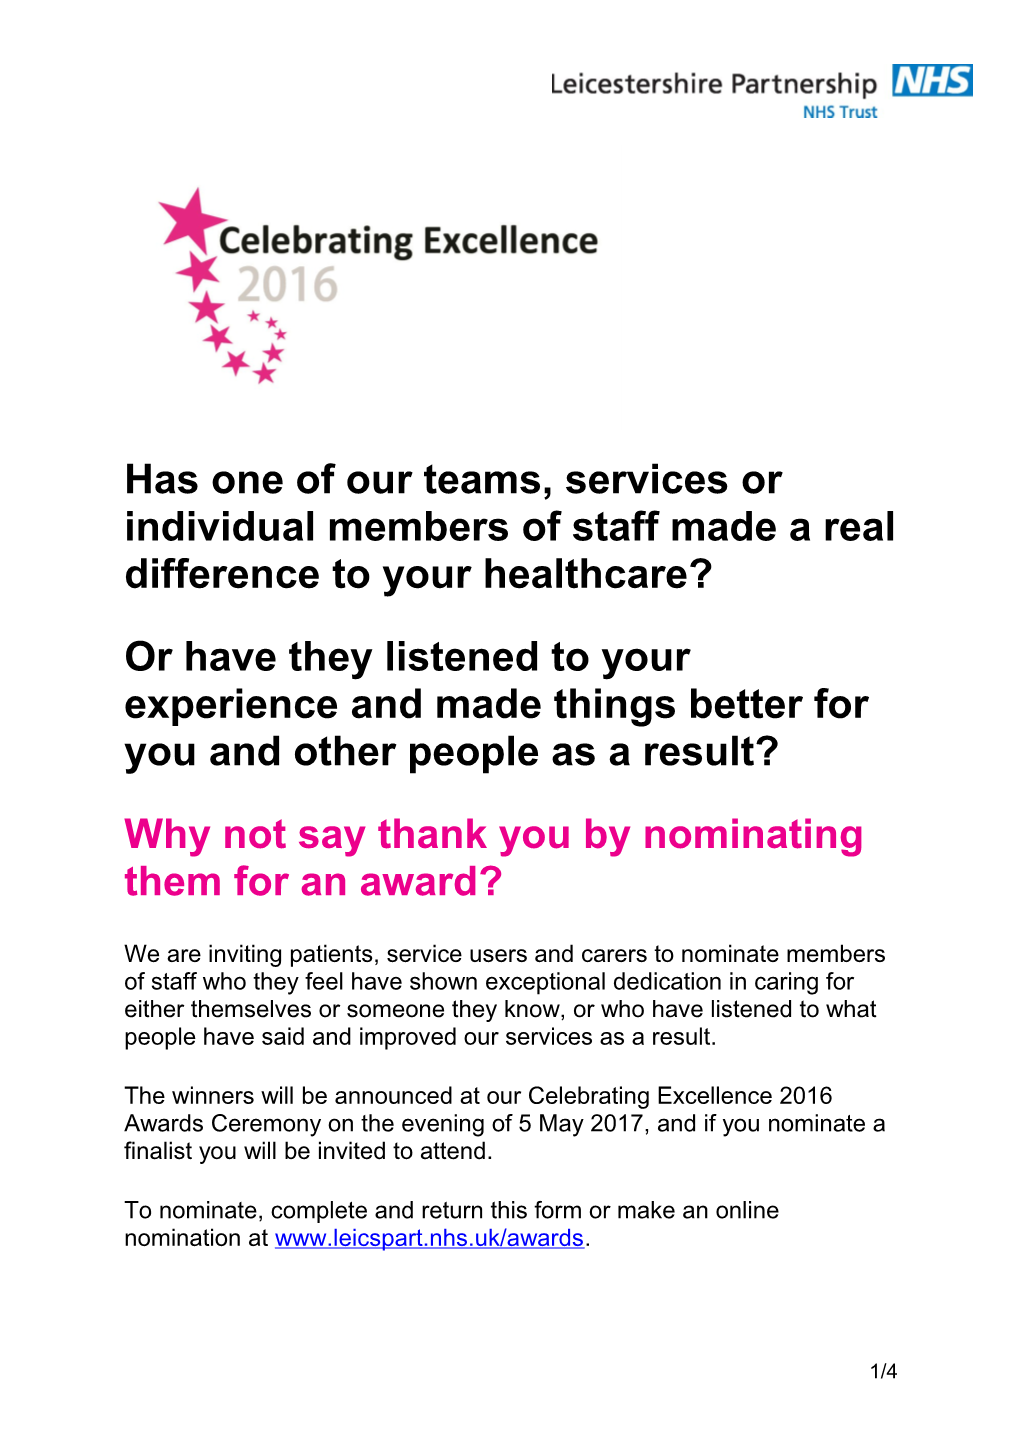 Why Not Say Thank You by Nominating Them for an Award?